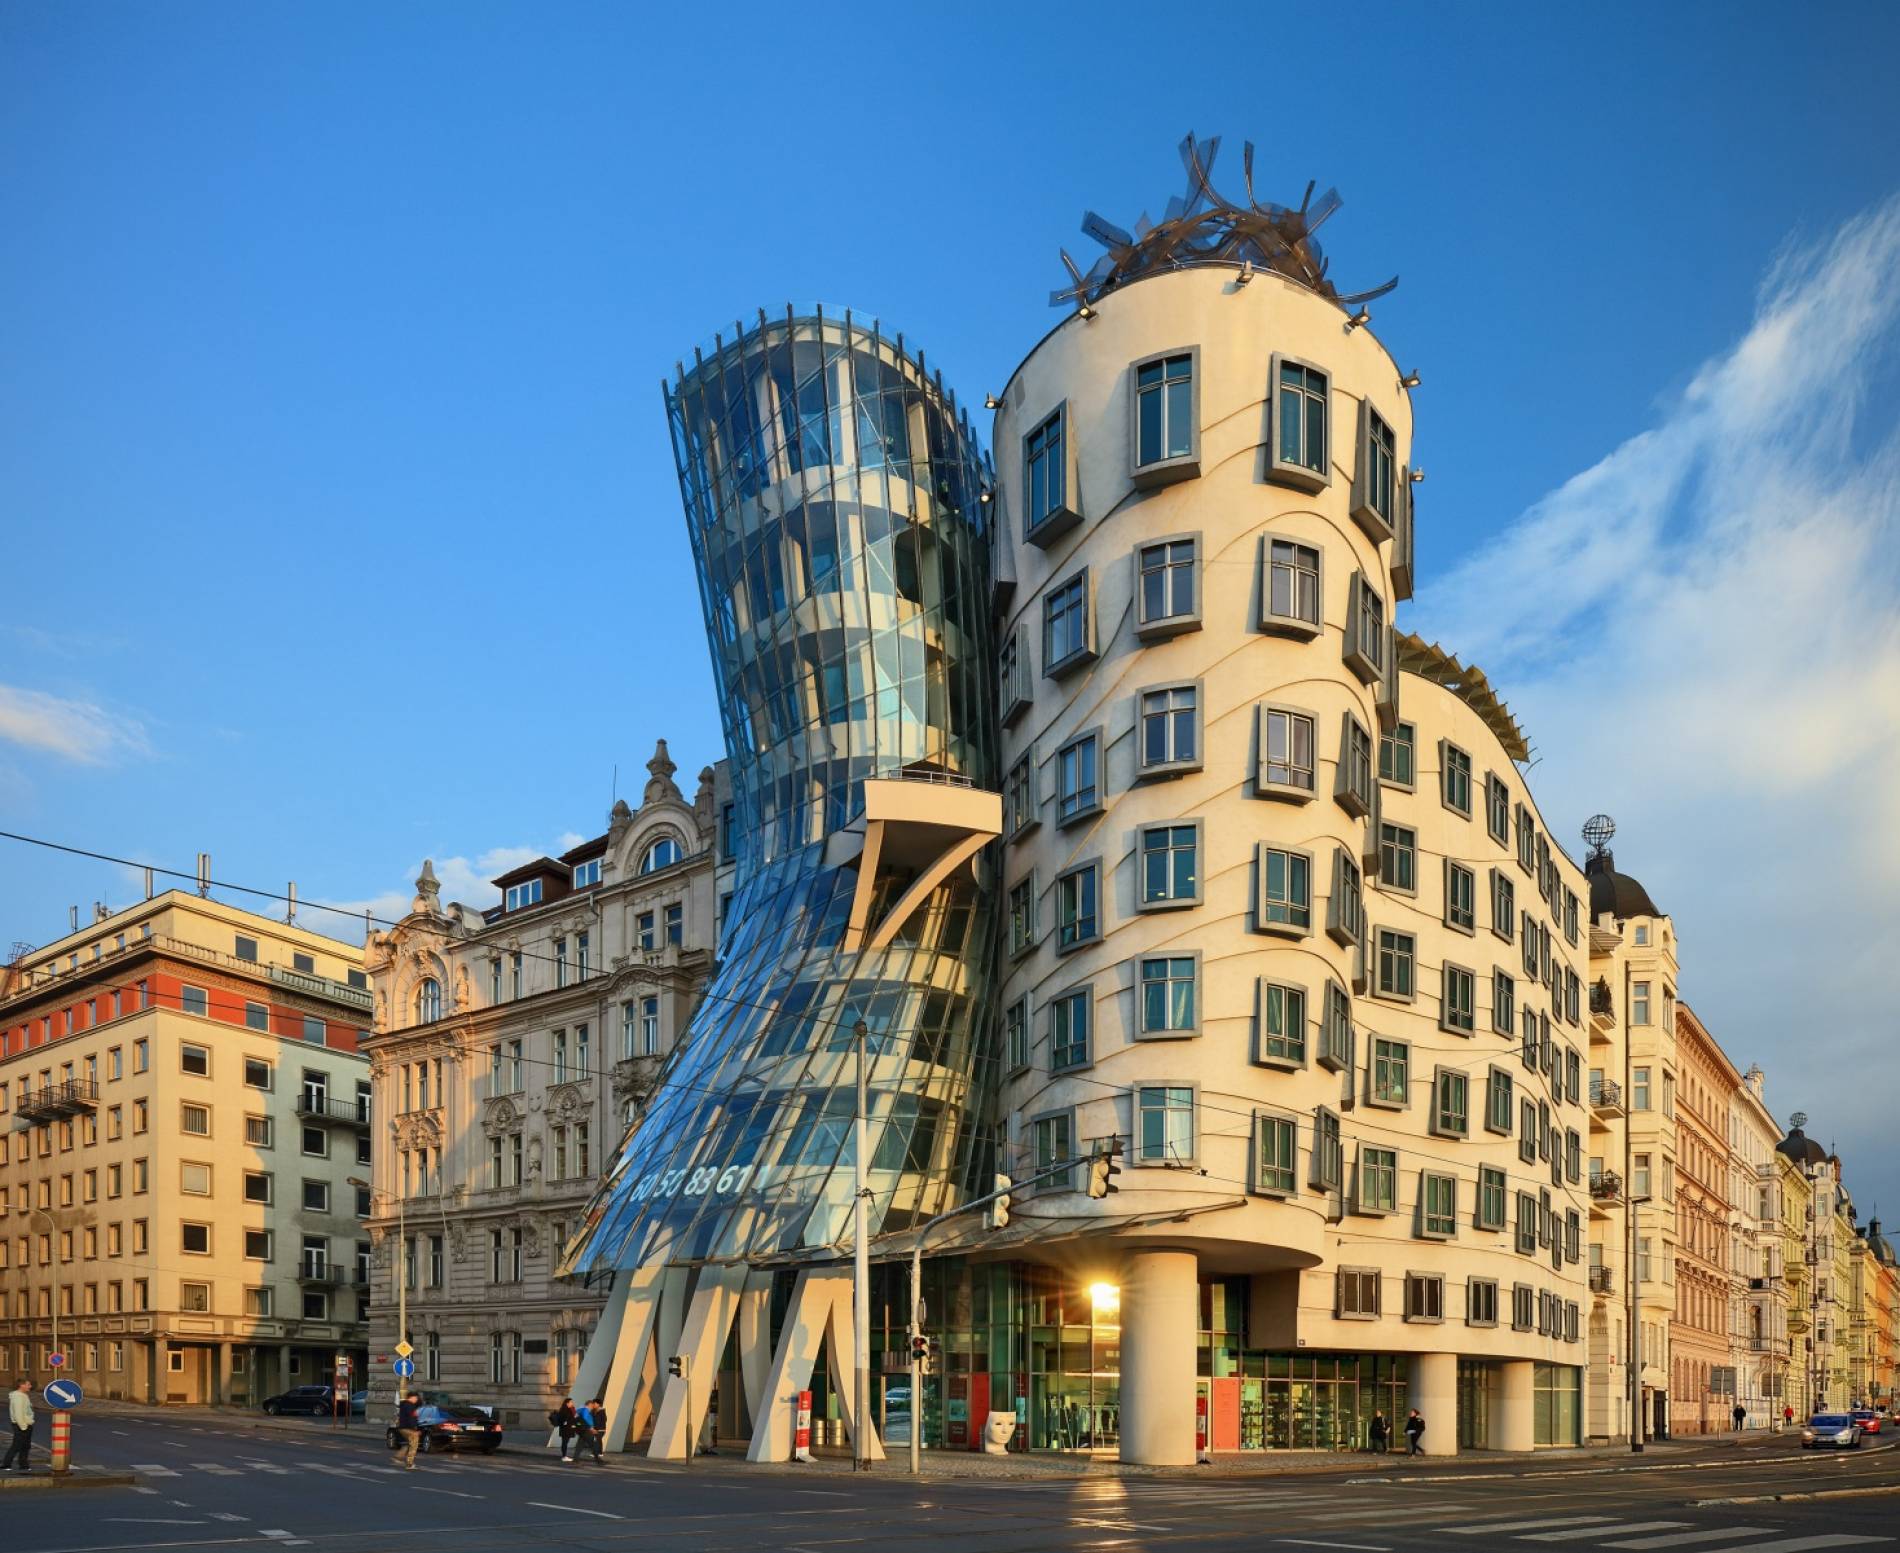 Welcome to official website of Dancing House hotel